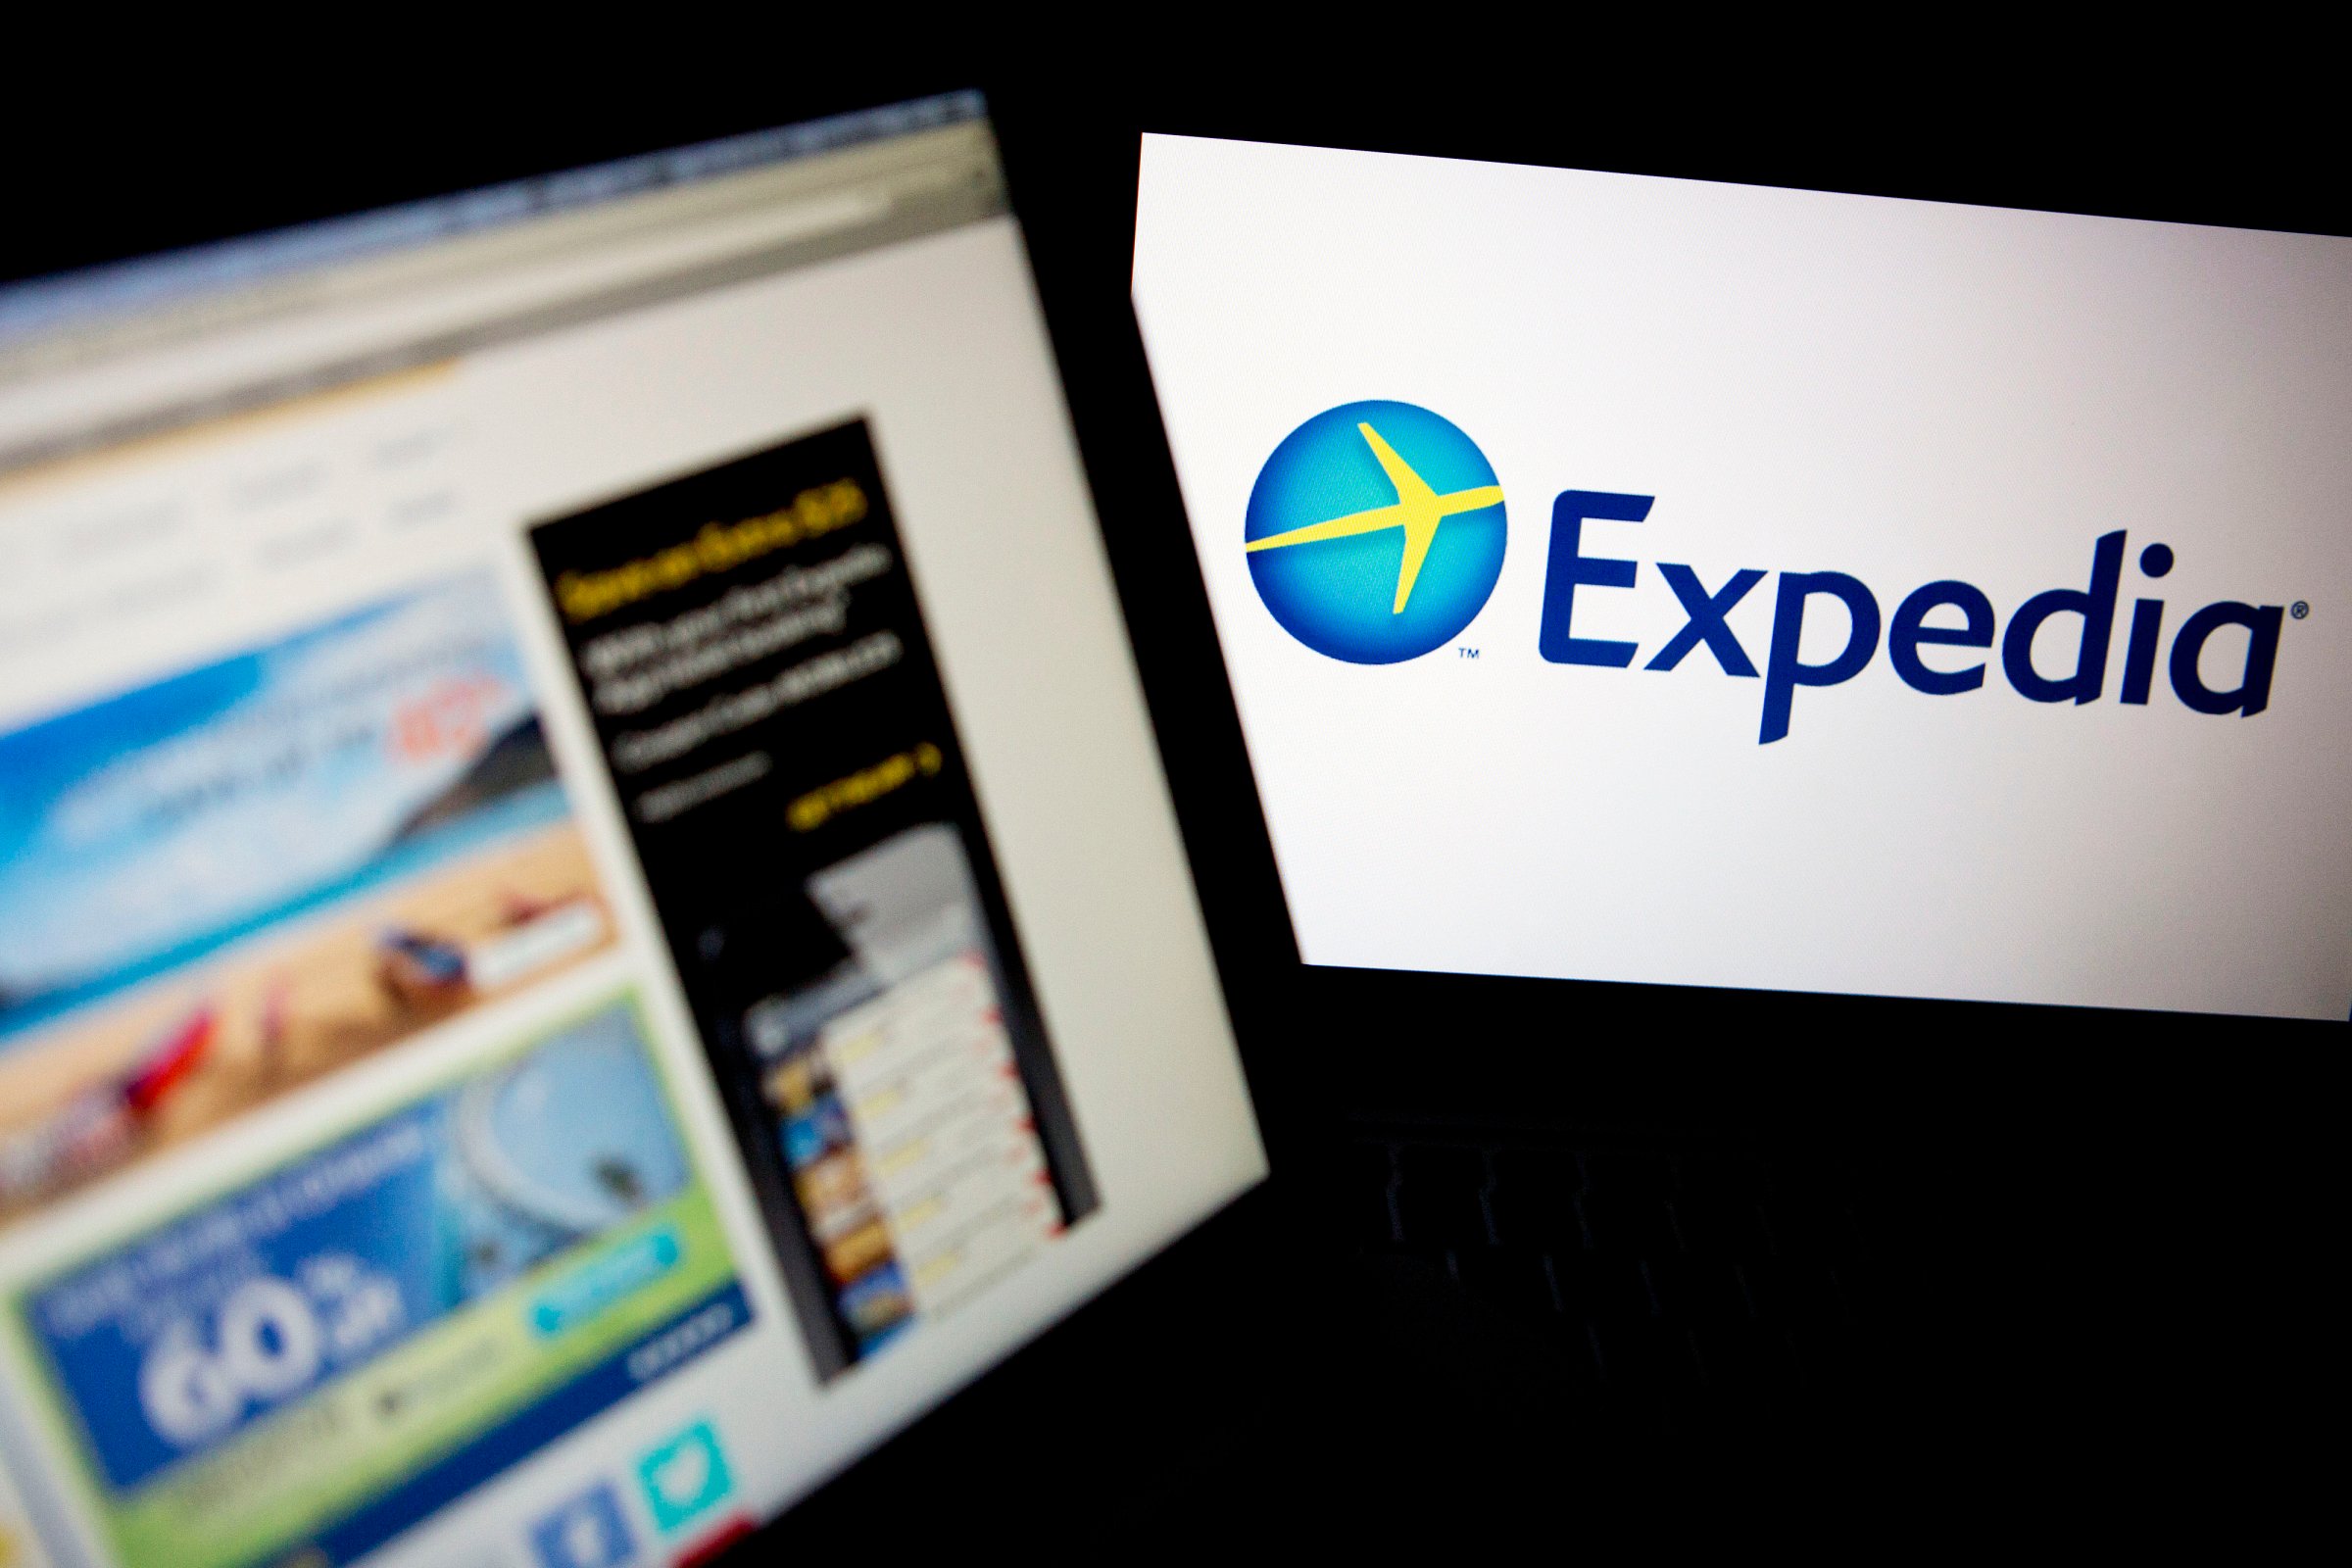 The Expedia Inc. homepage and logo.